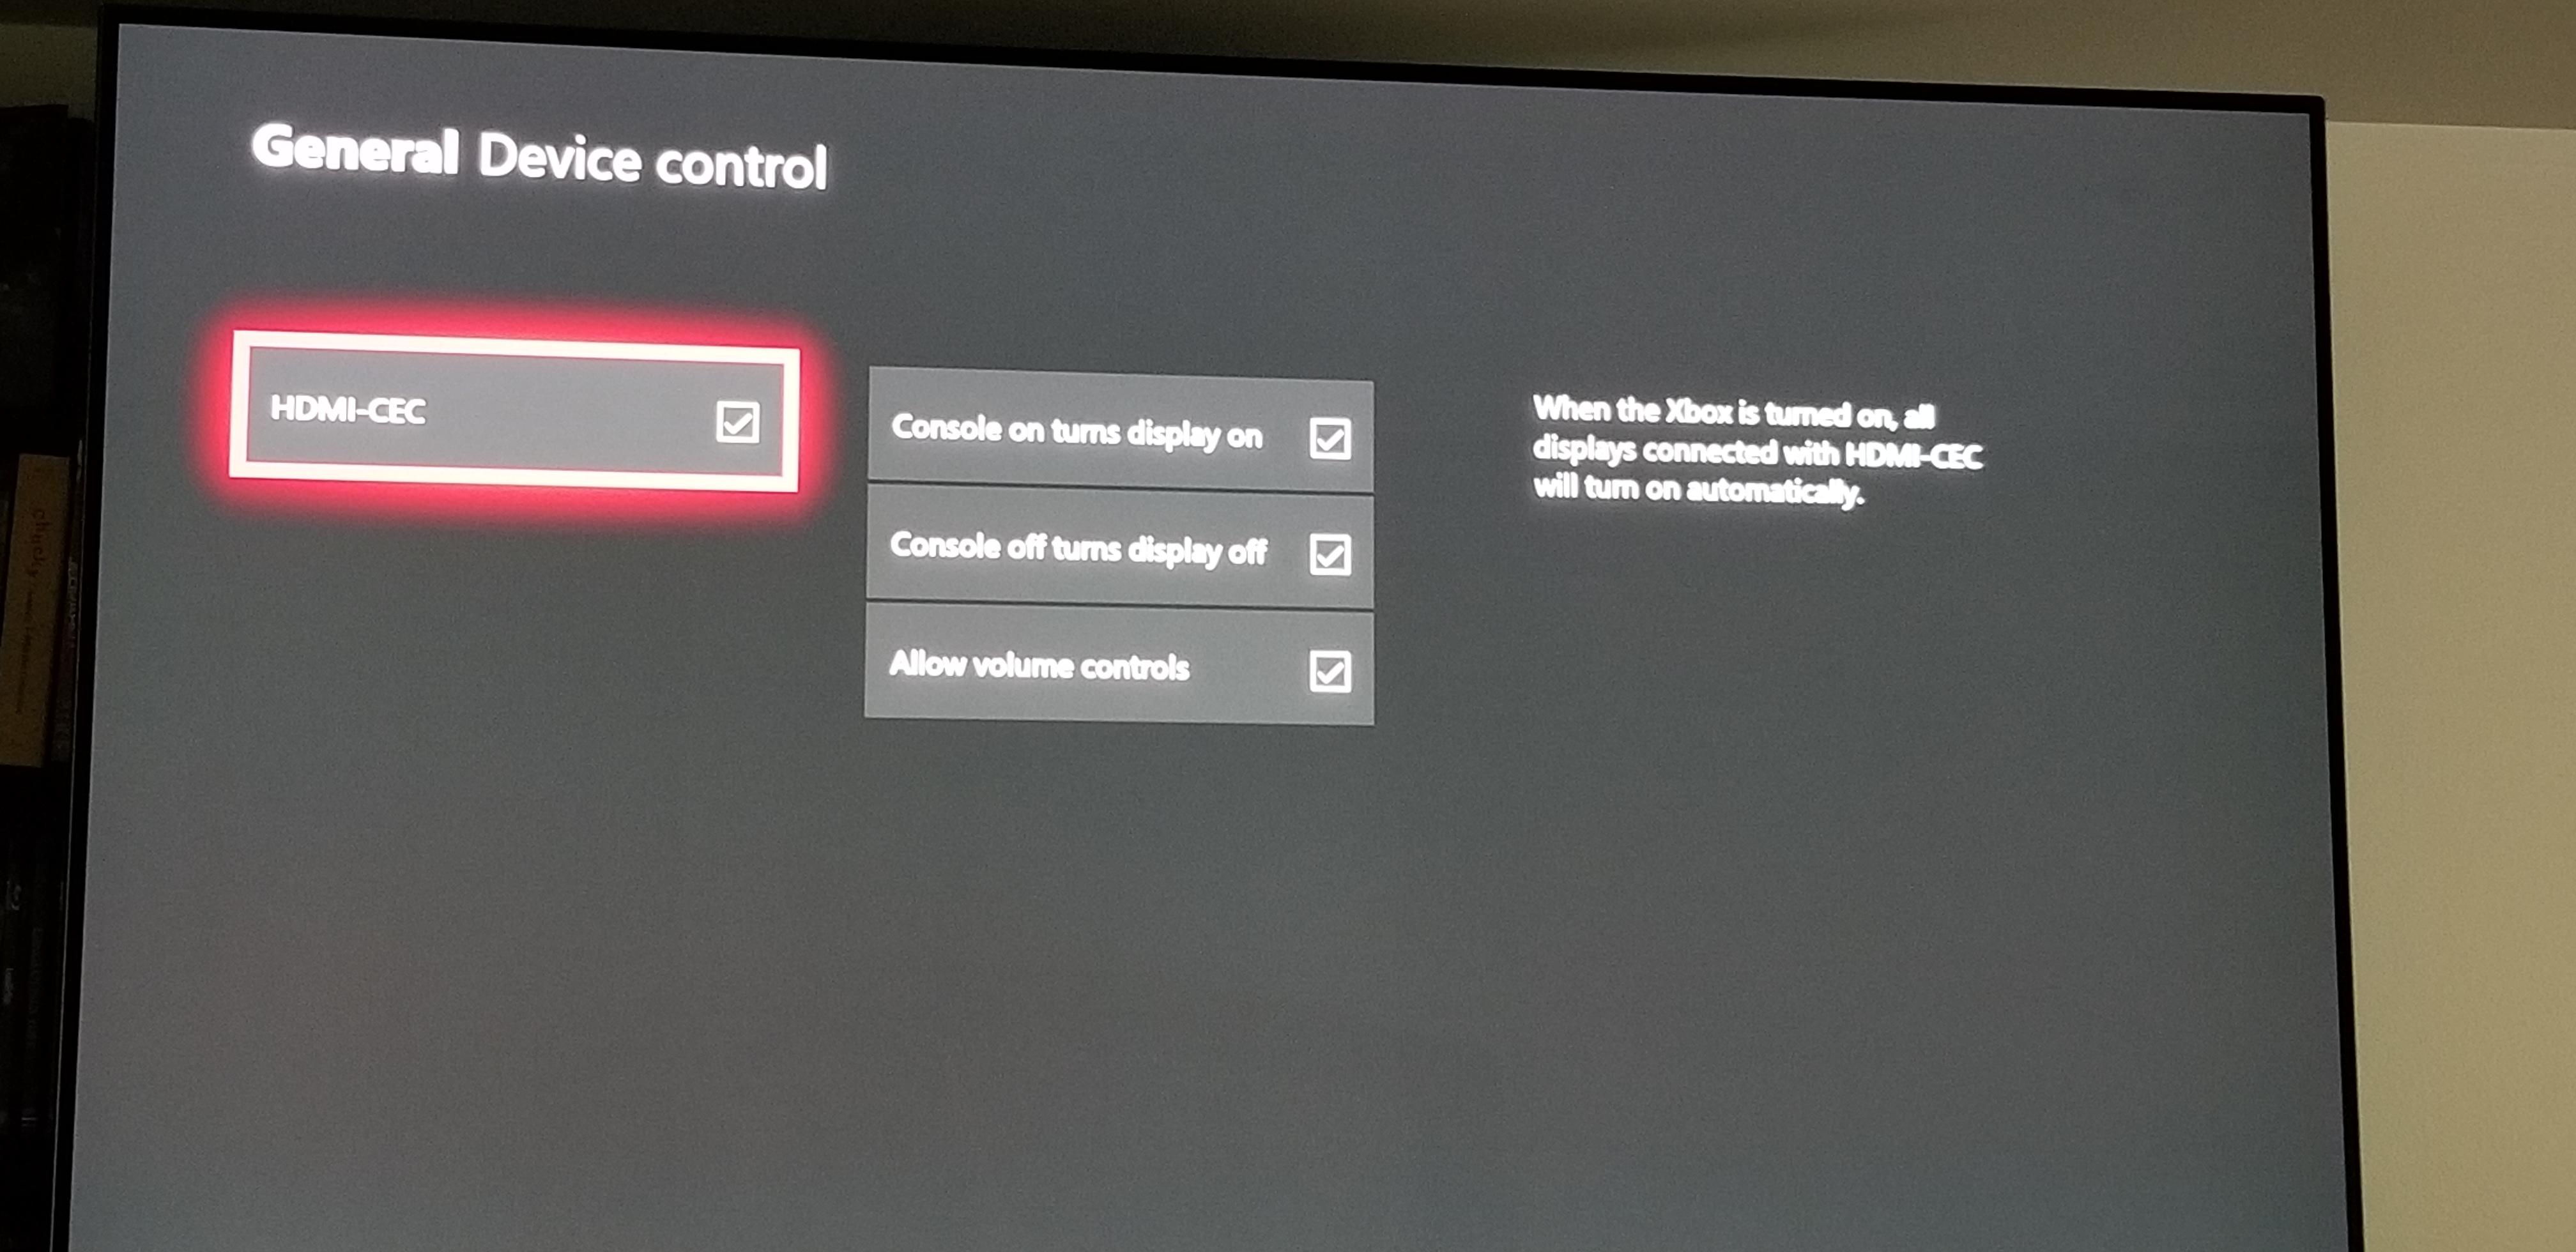 If possible, connect the Xbox One X to a different TV or monitor using a known working HDMI cable.
This helps determine if the issue is with the console or the original display.